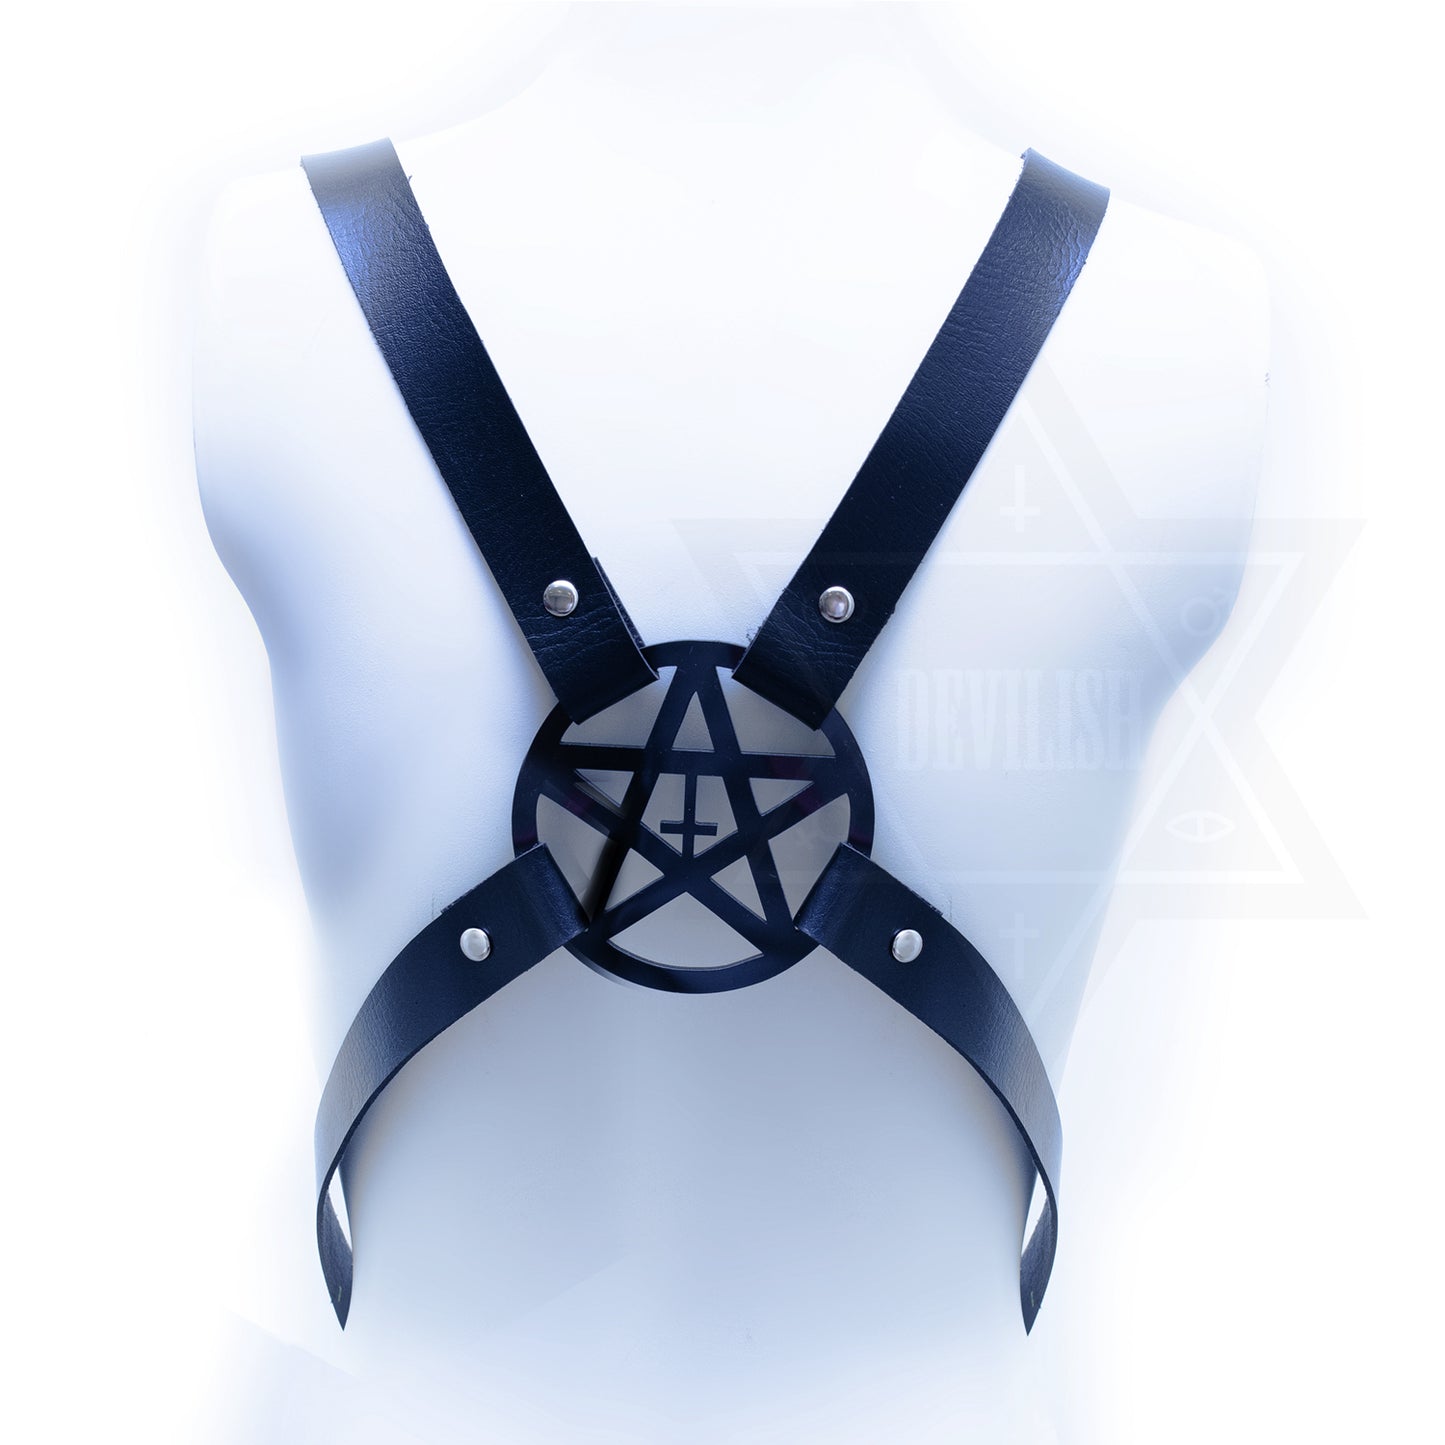 Witch trials harness